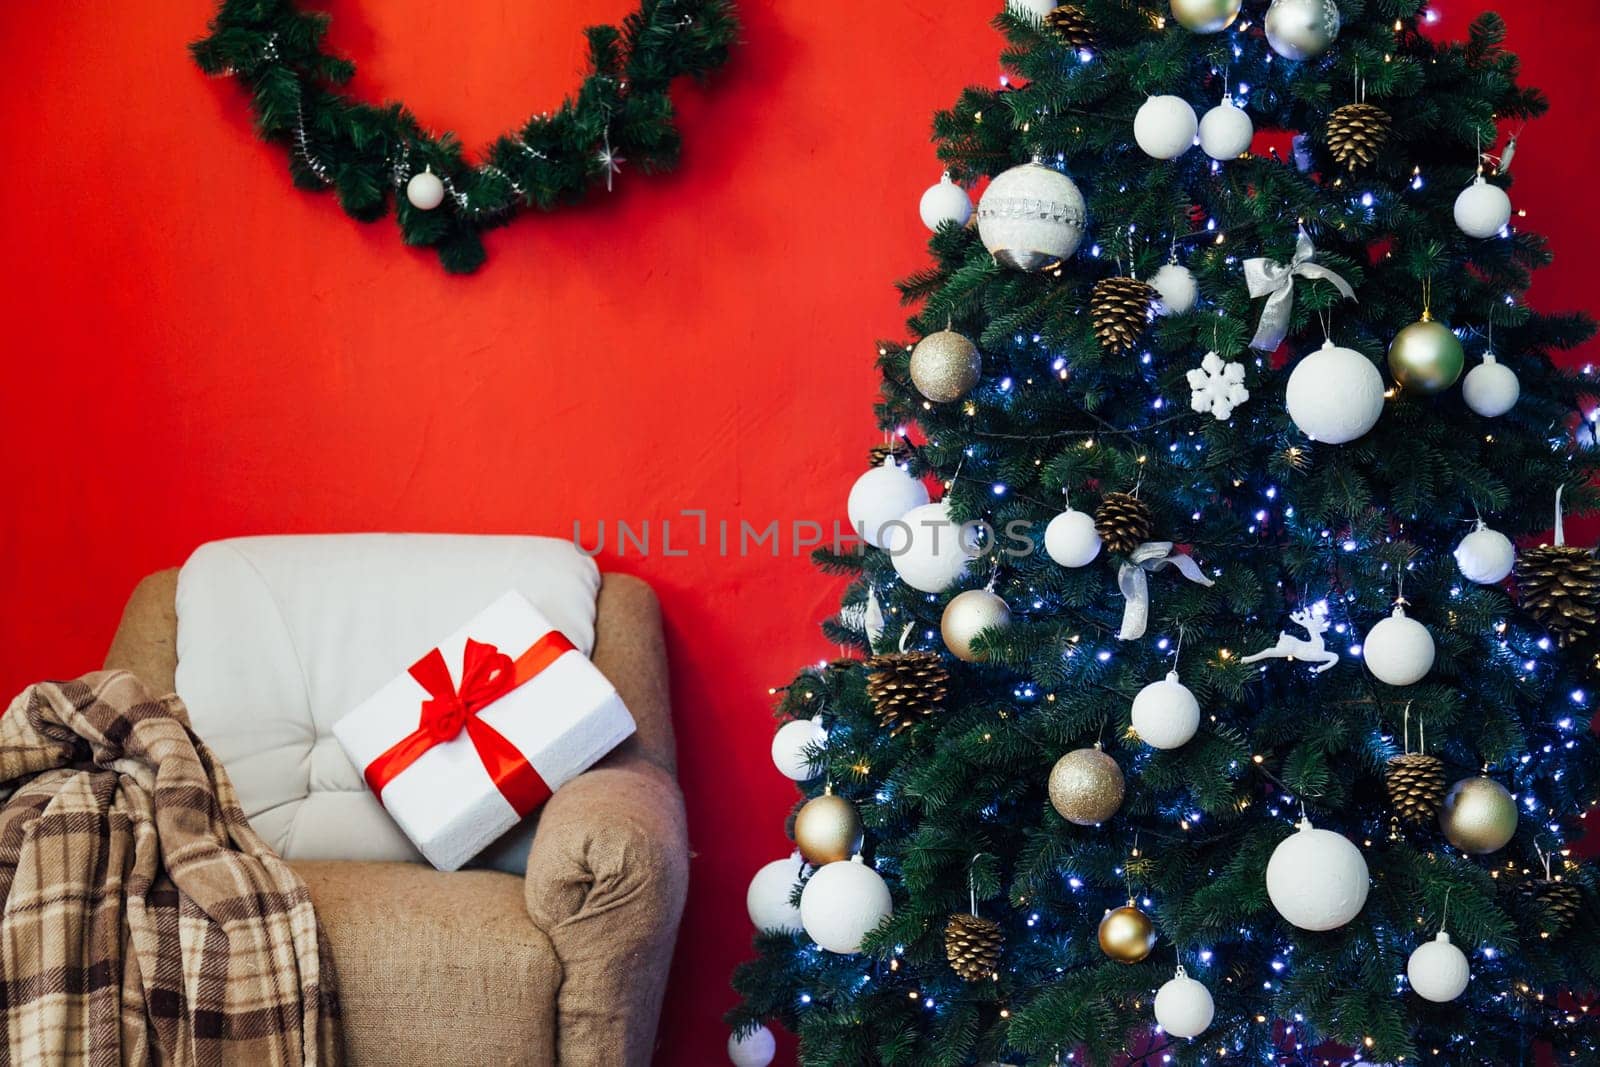 Christmas home interior Christmas tree red gifts new year decor festive background 2020 by Simakov